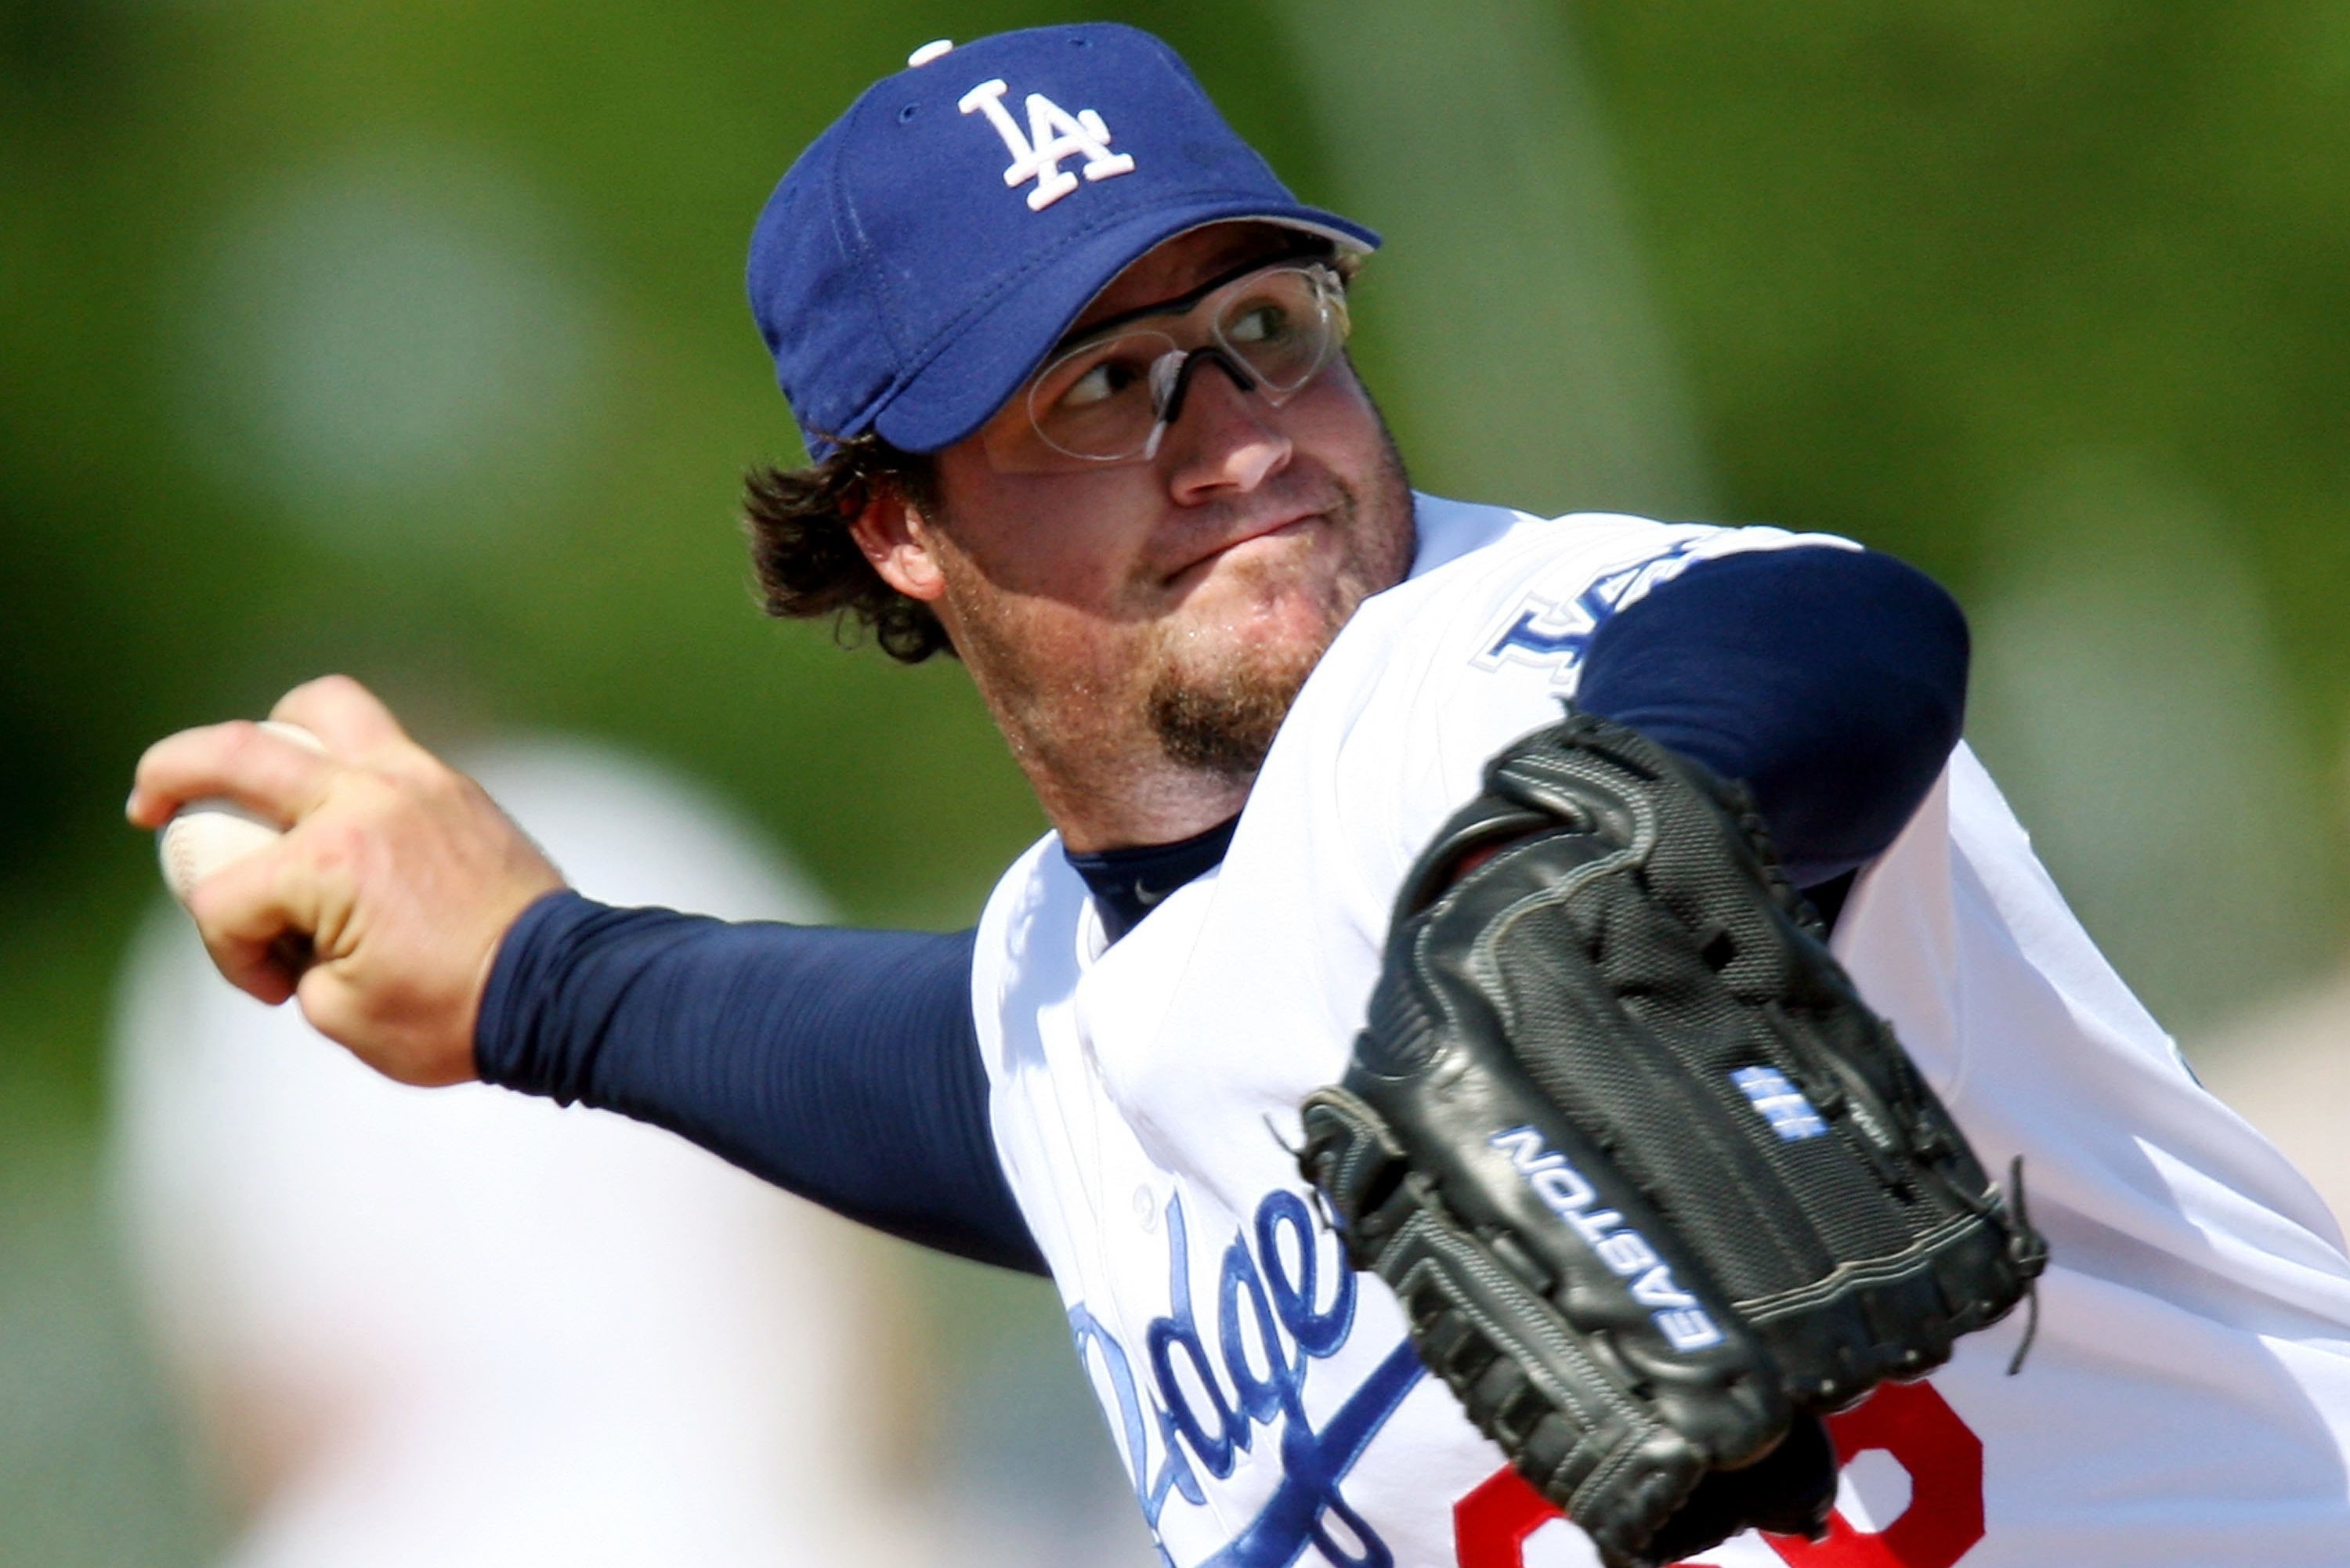 What Happened To Eric Gagne? (Complete Story)